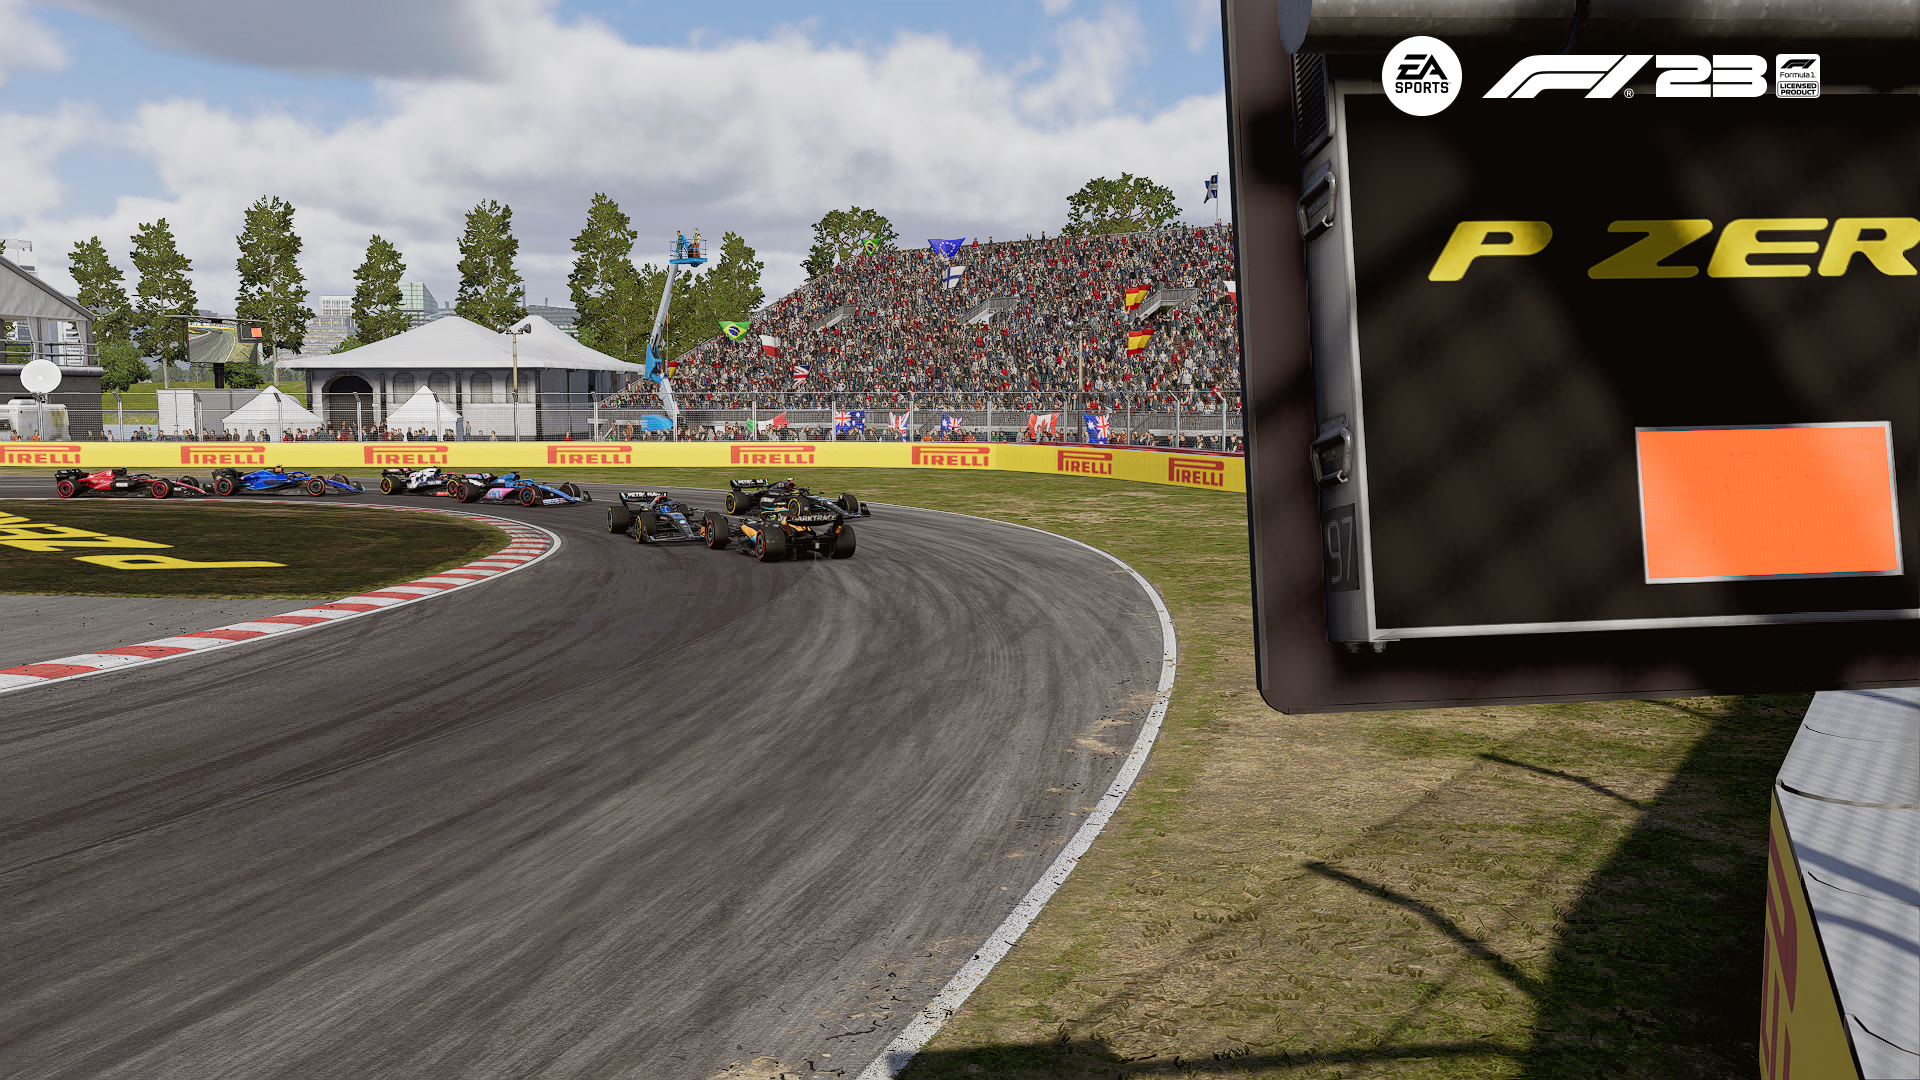 F1 23: All Race Tracks in the Game